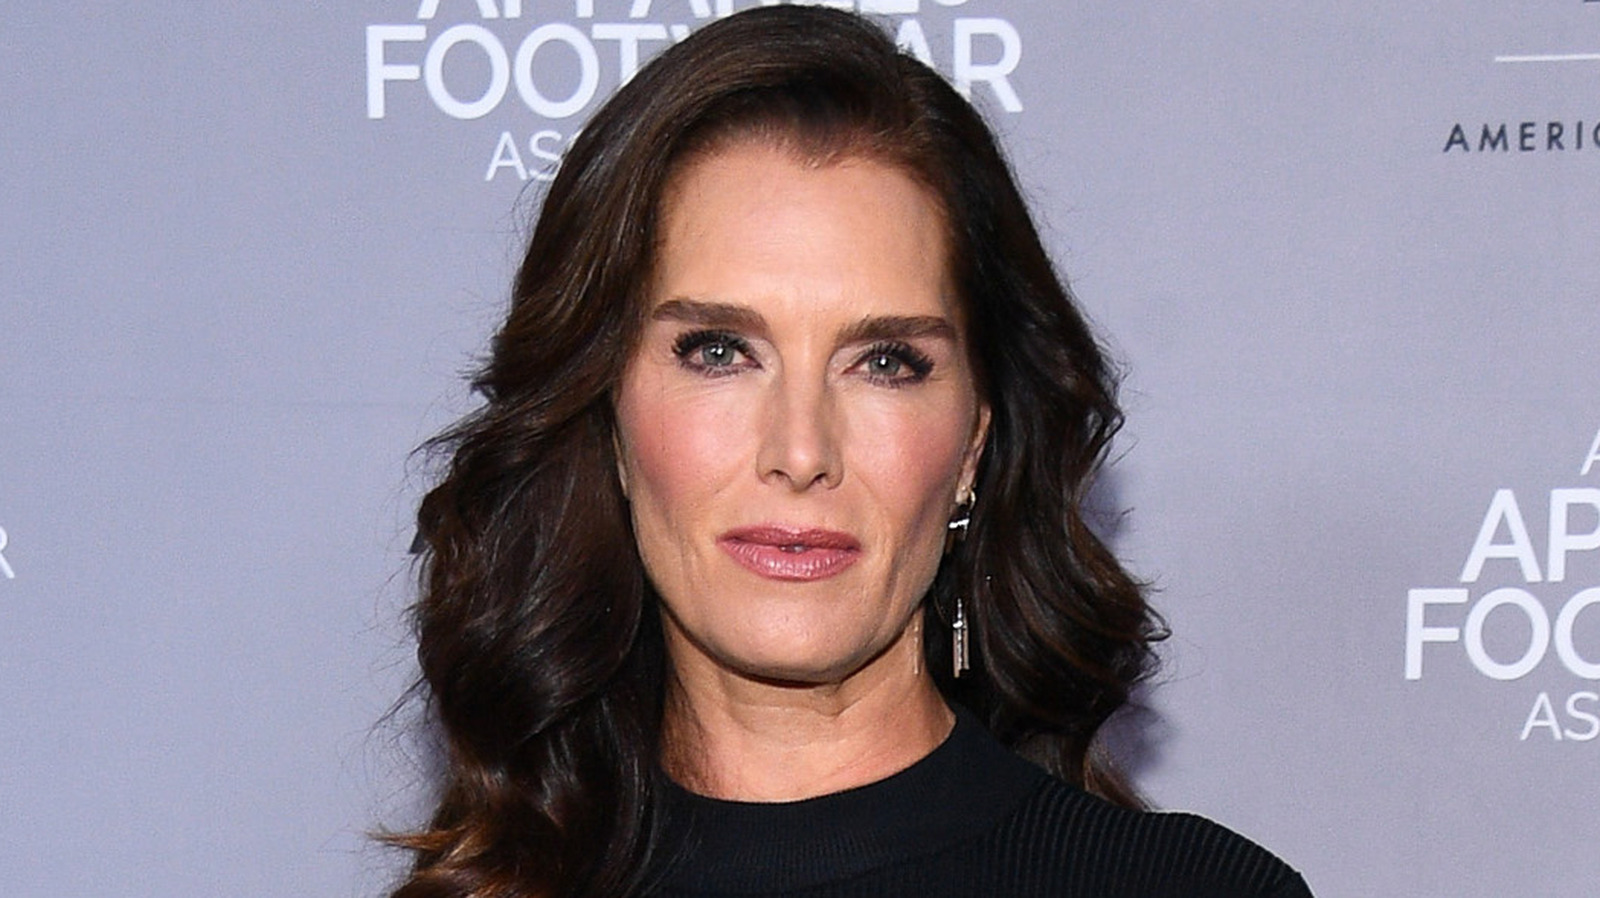 The Biggest Things Brooke Shields Has Revealed Through The Years